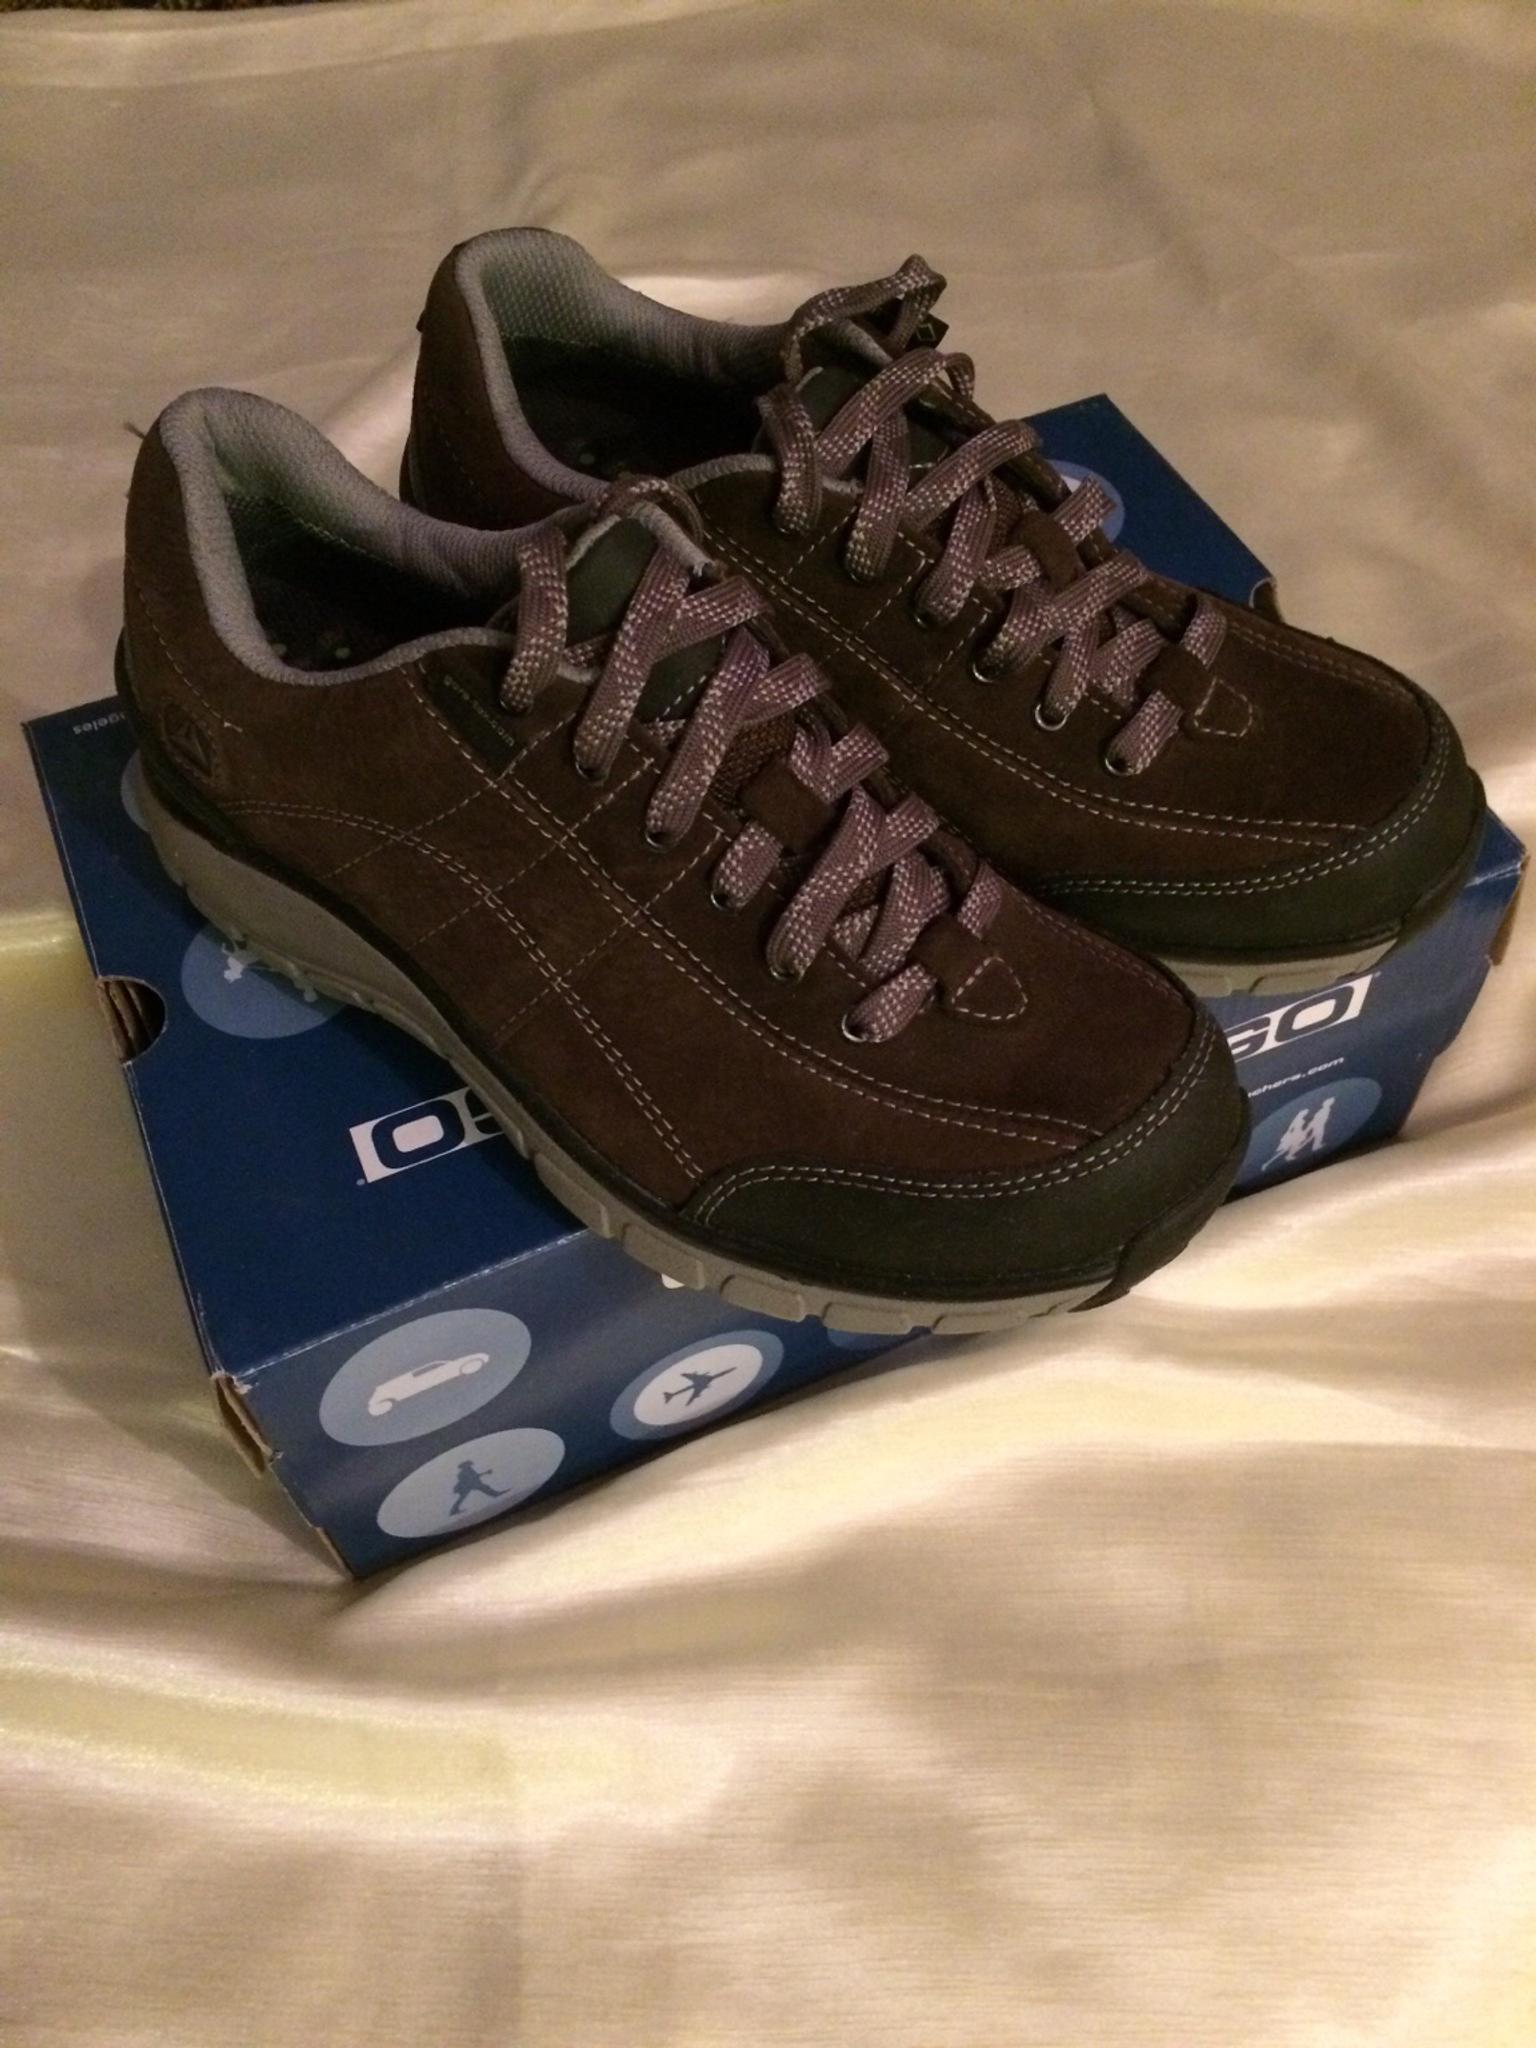 clarks shoes trainers ladies